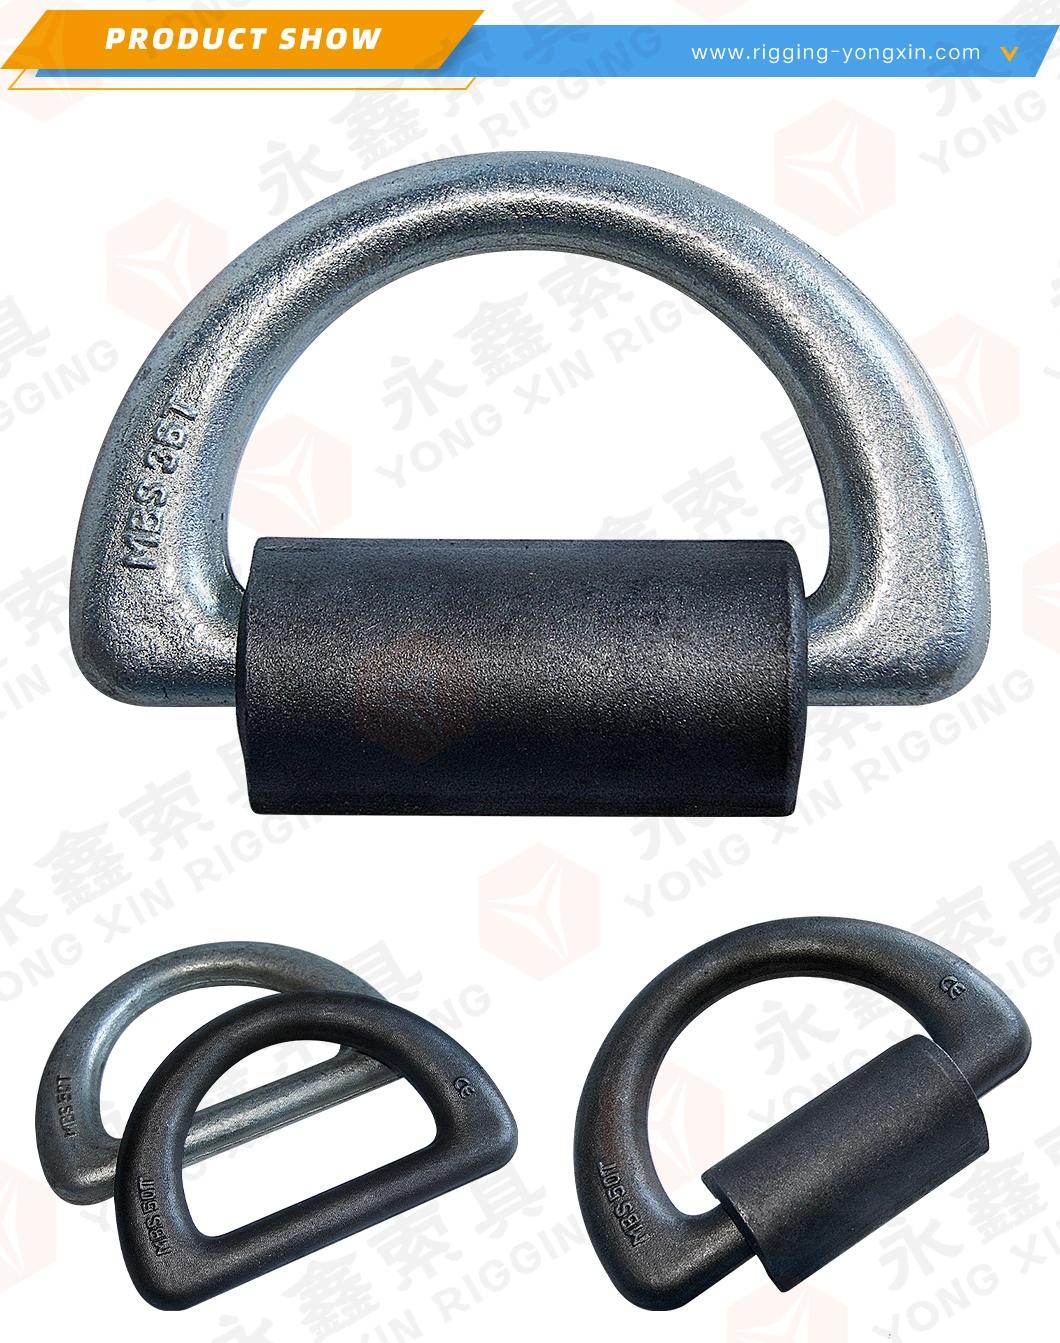 Chinese Manufacture High Quality Rigging Forged Hardware Stainless Steel on Pivoting D Link|Lashing D Ring